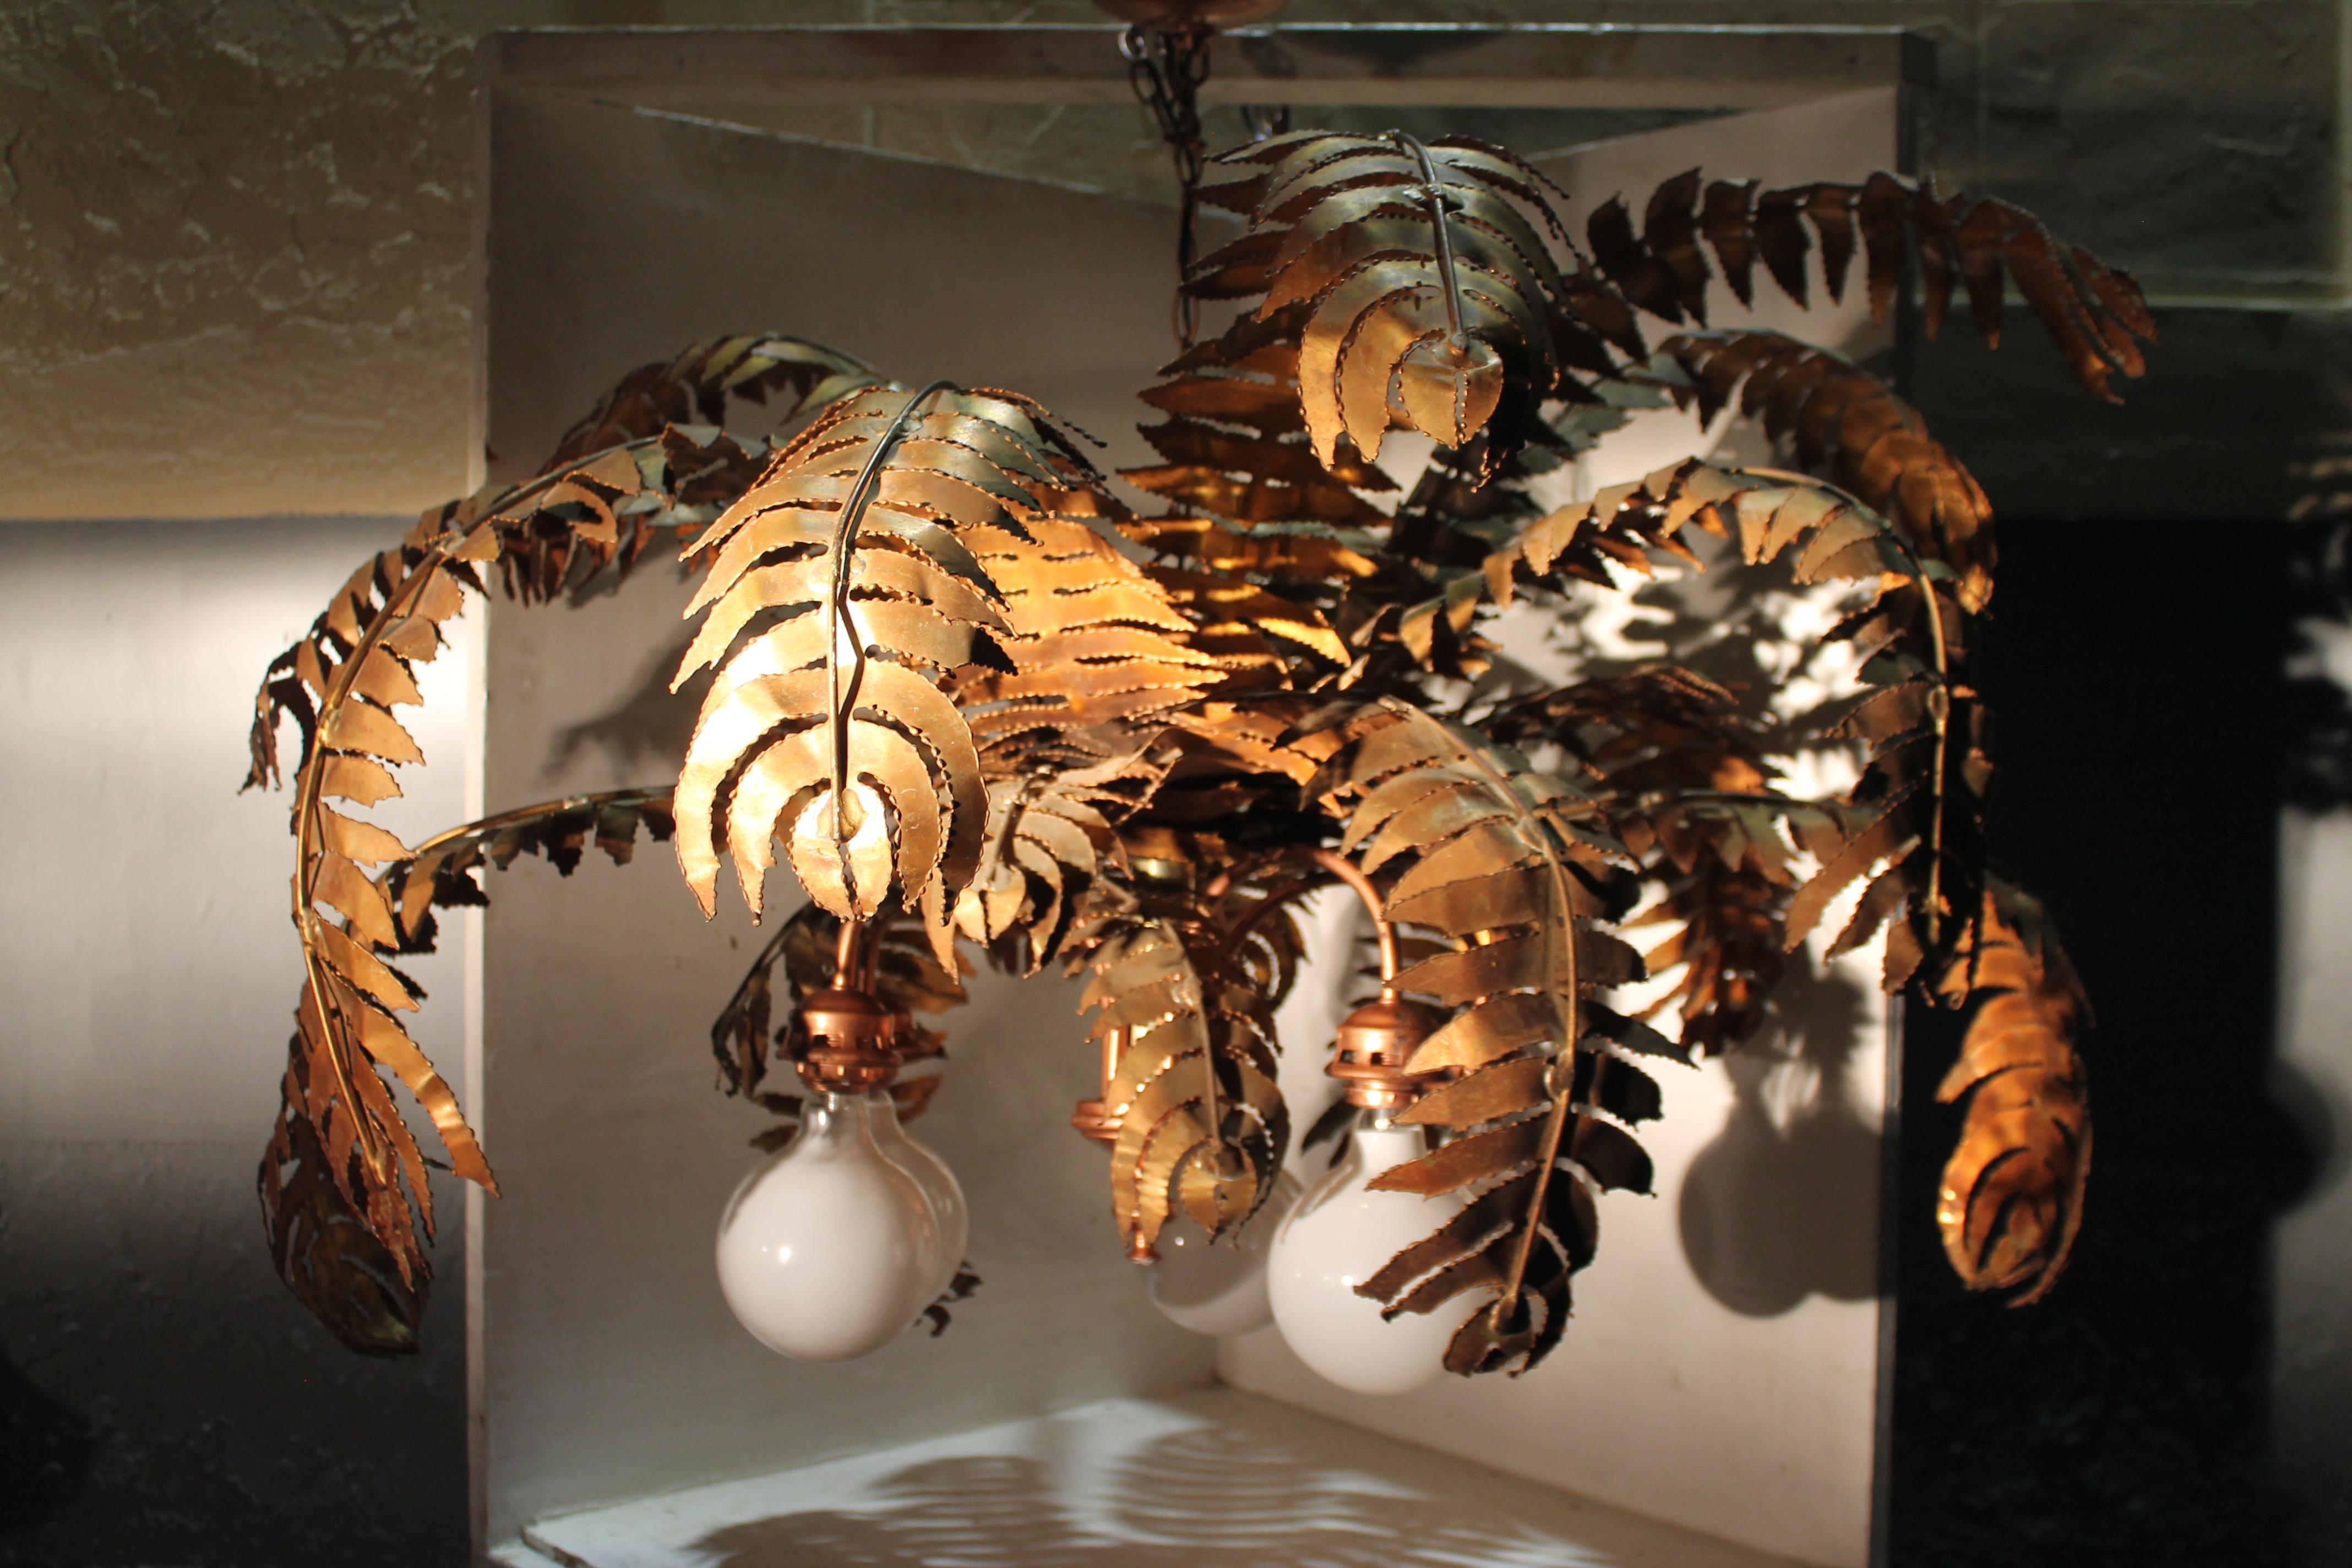 Spectacular and Very Rare. 1970's French Mid Century Modern Brutalist Cut Brass Palm Tree Chandelier. Large statement piece acquired from the Club Castell in Paris. Please look closely at pictures as they tell the story of this quite unique